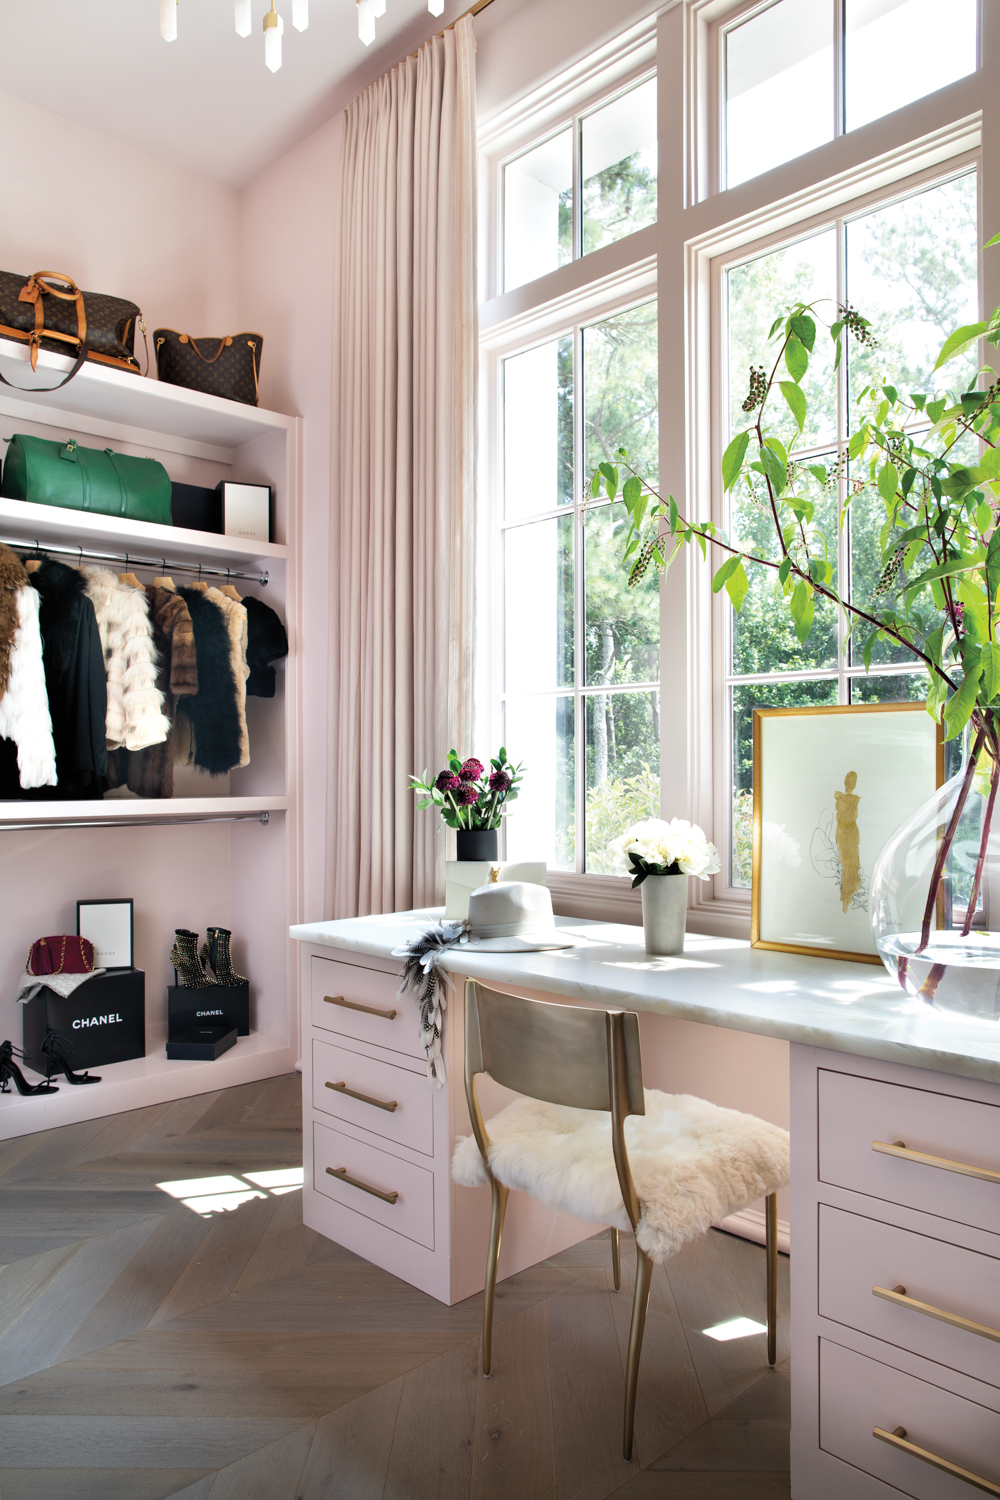 Barbiecore interior design closet with a matching vanity and brass vanity chair